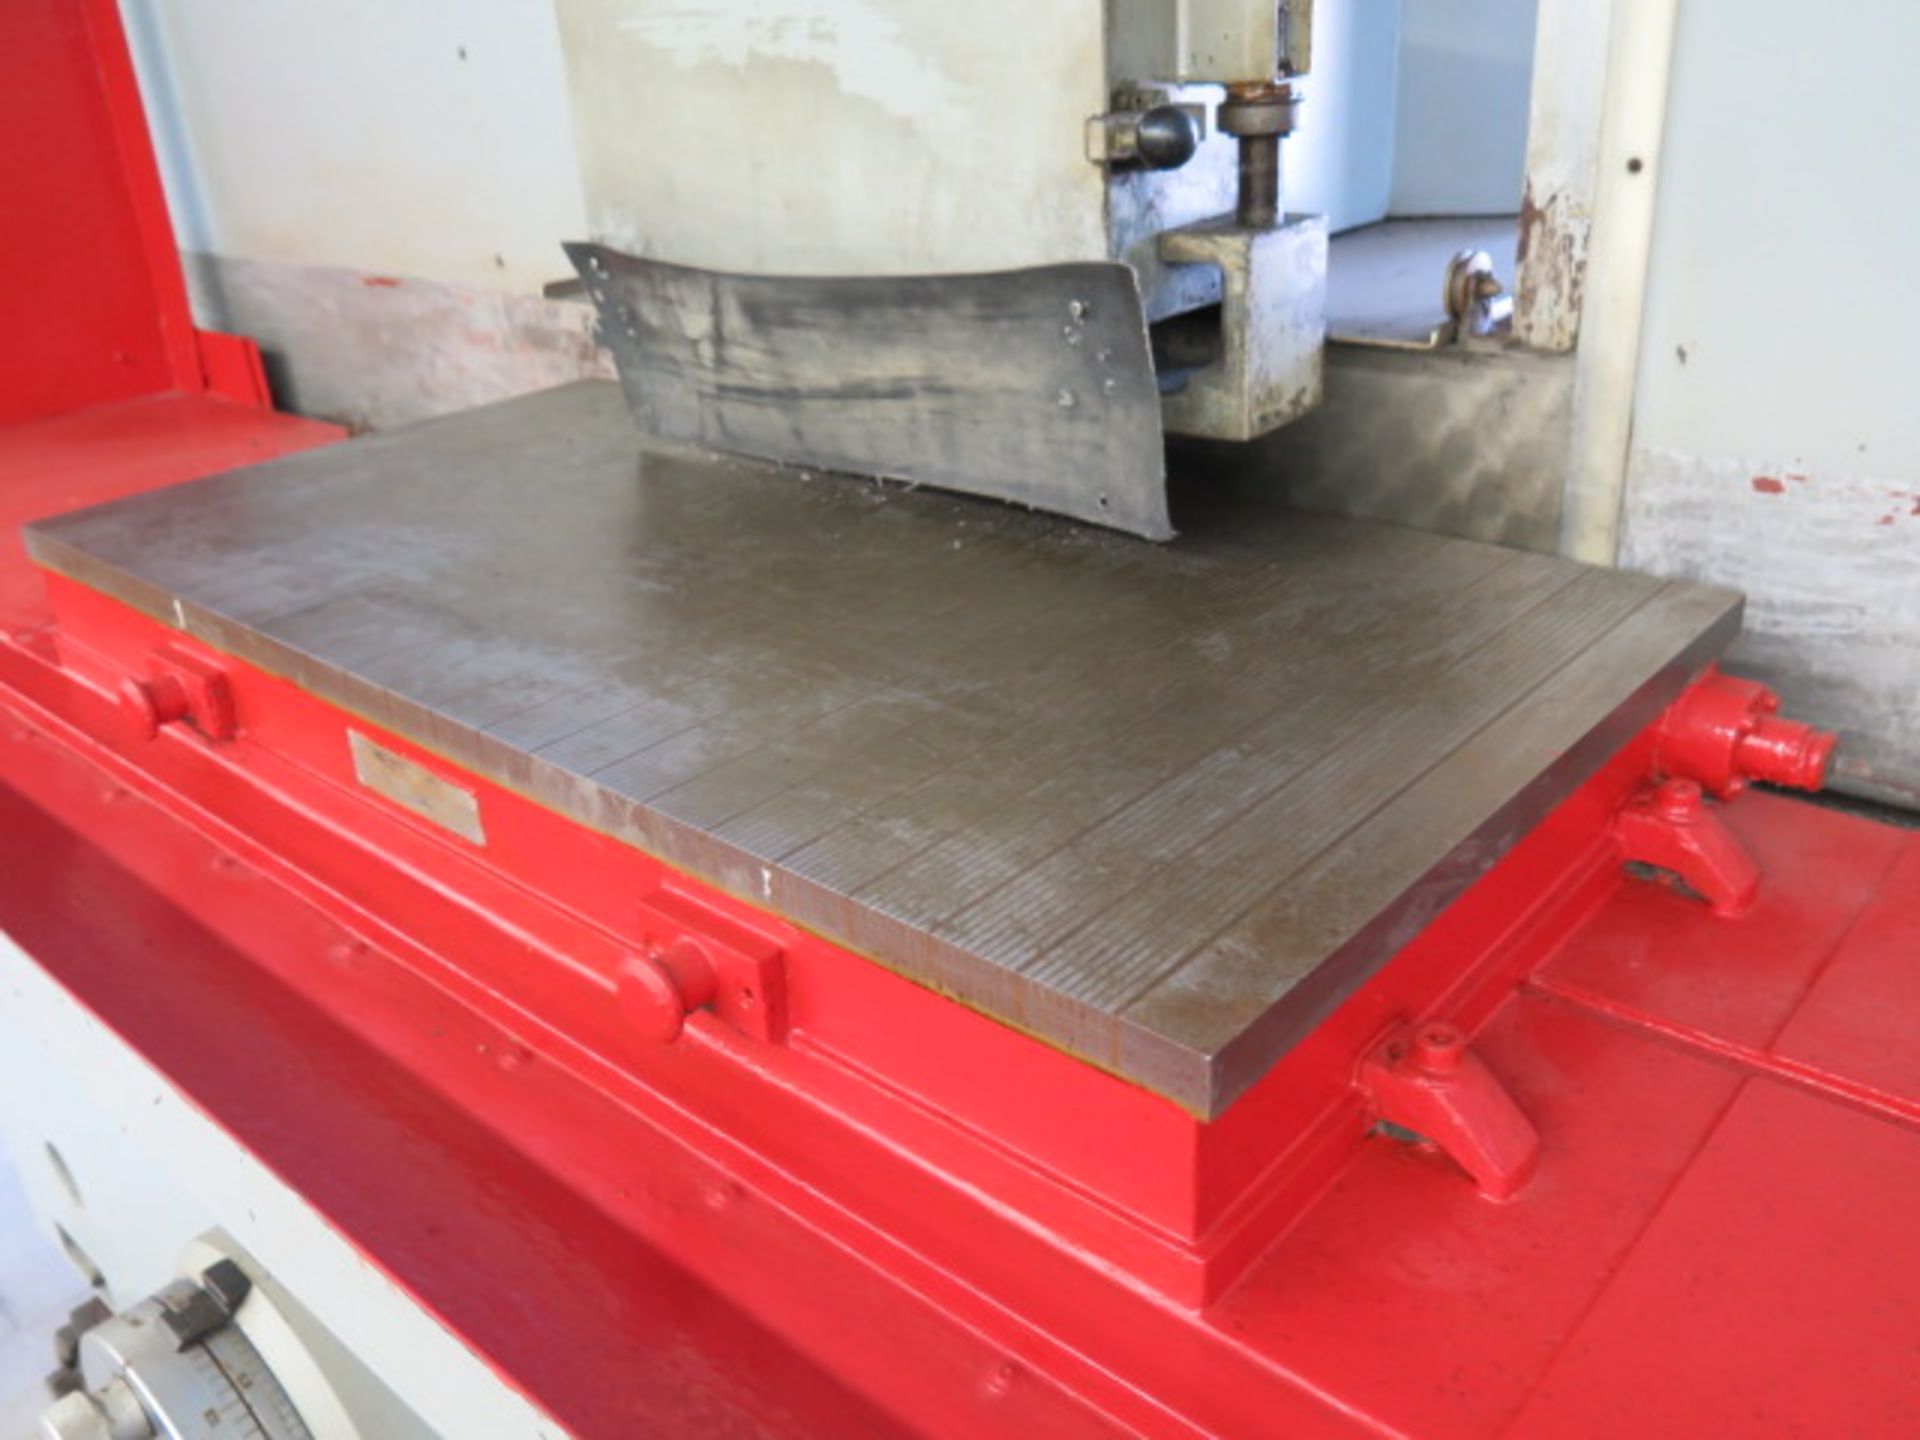 ELB SWBE 010 NPC-K NC 20” x 40” NC Surface Grinder s/n 209030489 w/ ELB Controls, SOLD AS IS - Image 10 of 15